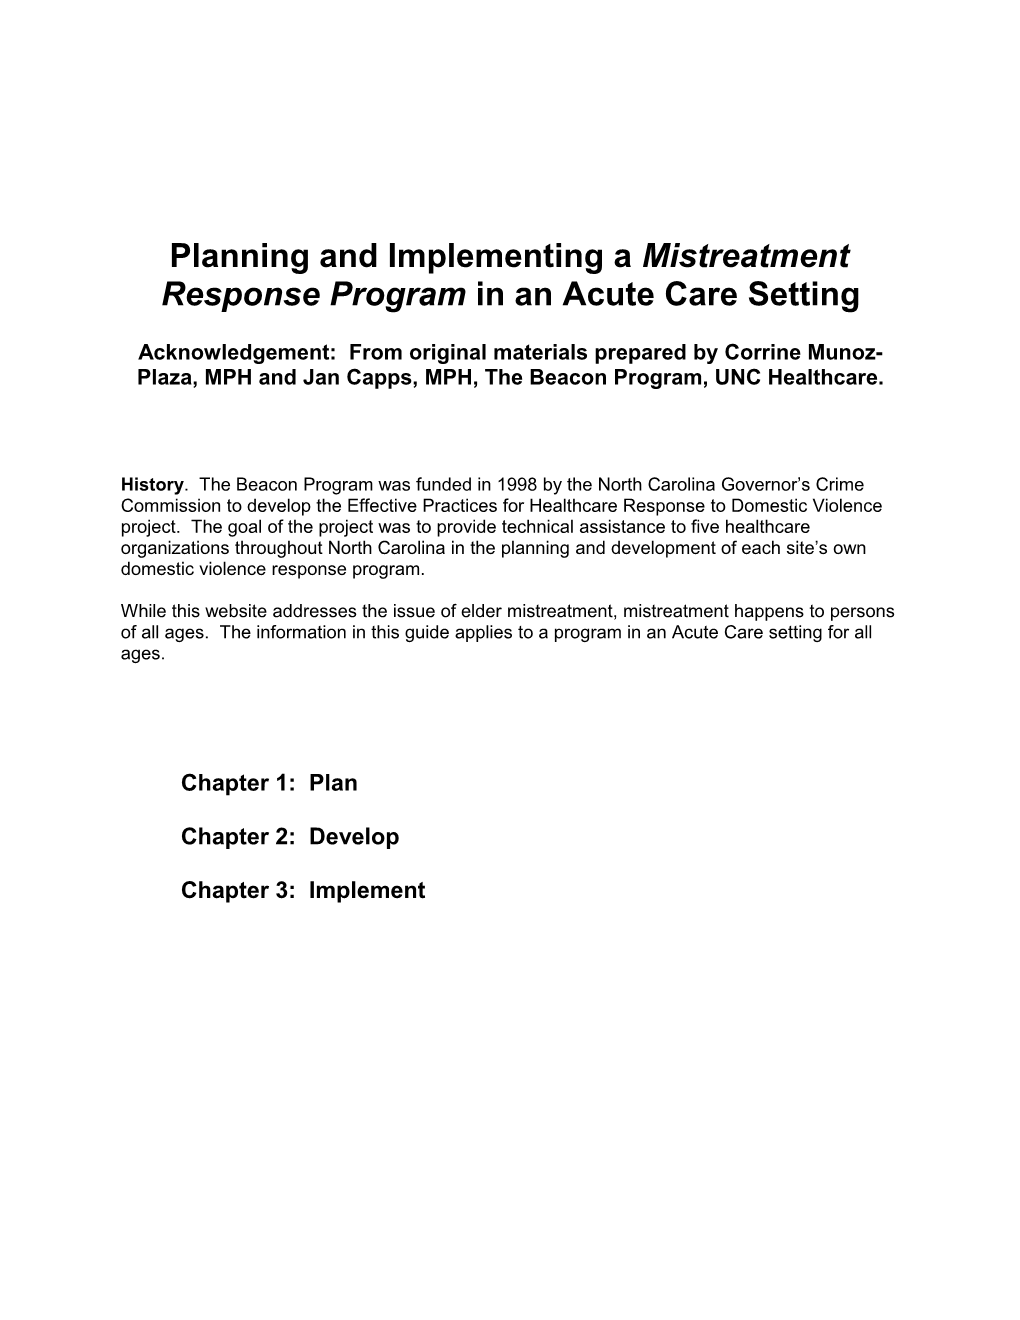 Planning and Implementing a Response Program in an Acute Care Setting